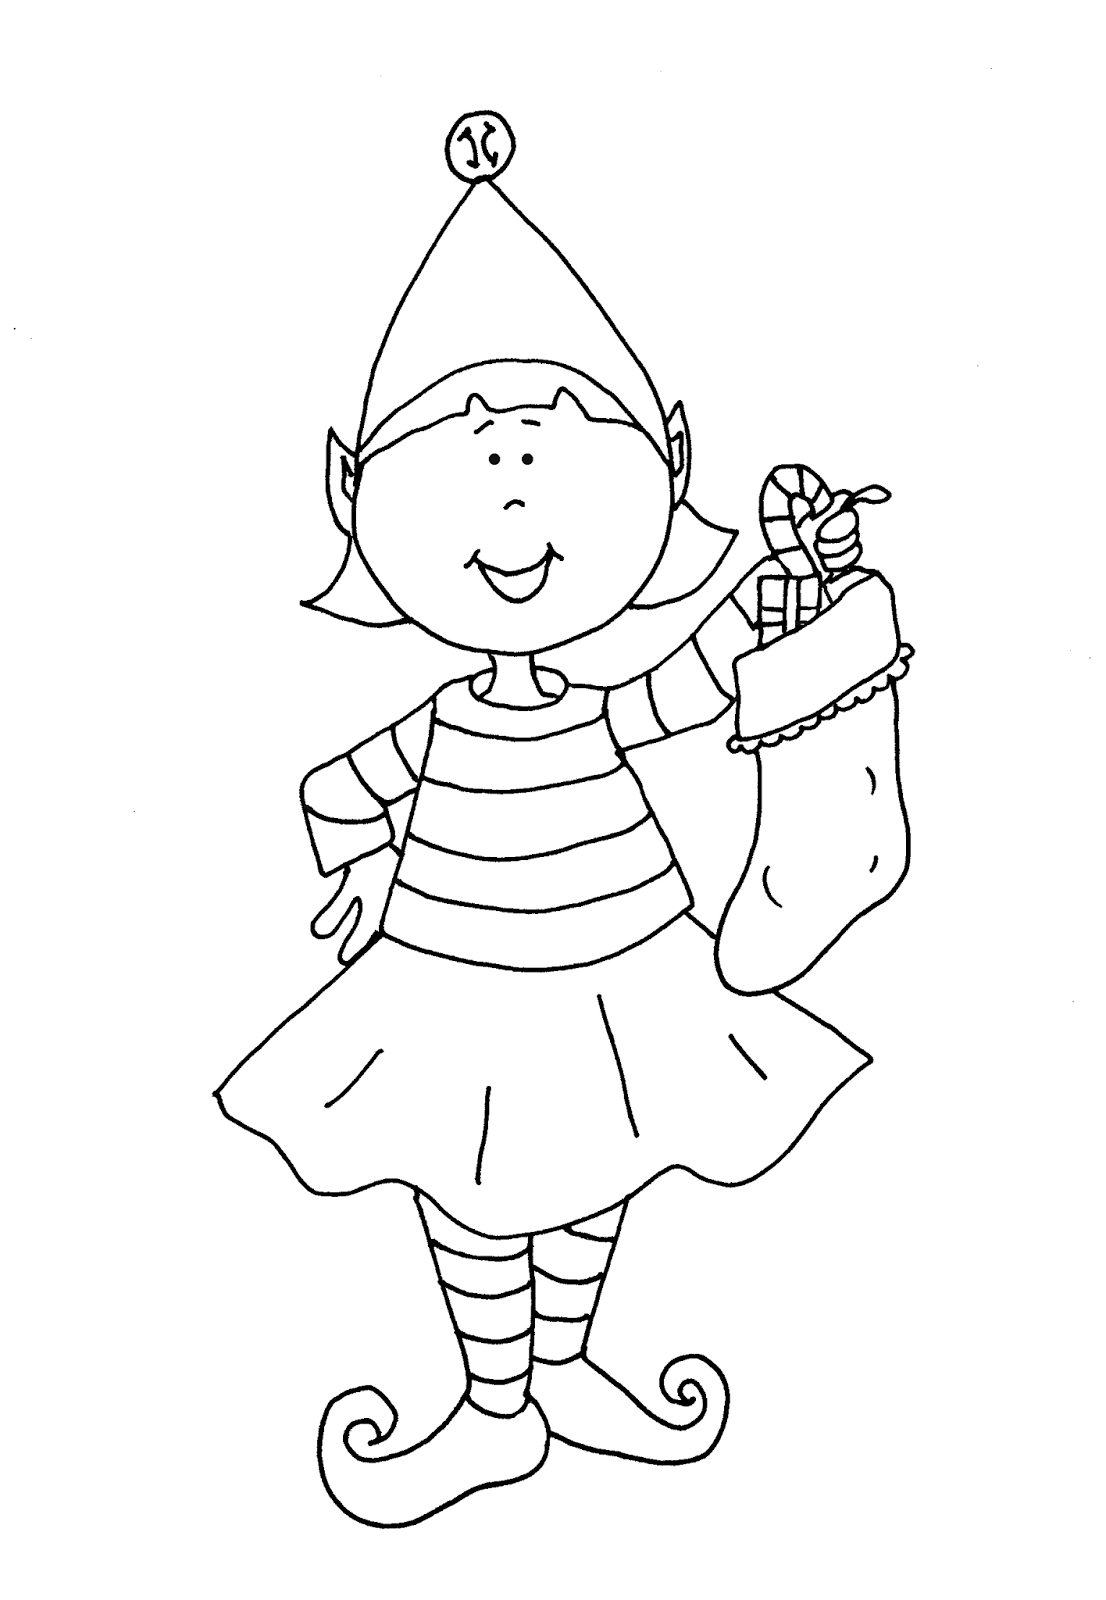 10 Pics of Boy Elf Coloring Pages - Cute Boy Elf Coloring Pages ...